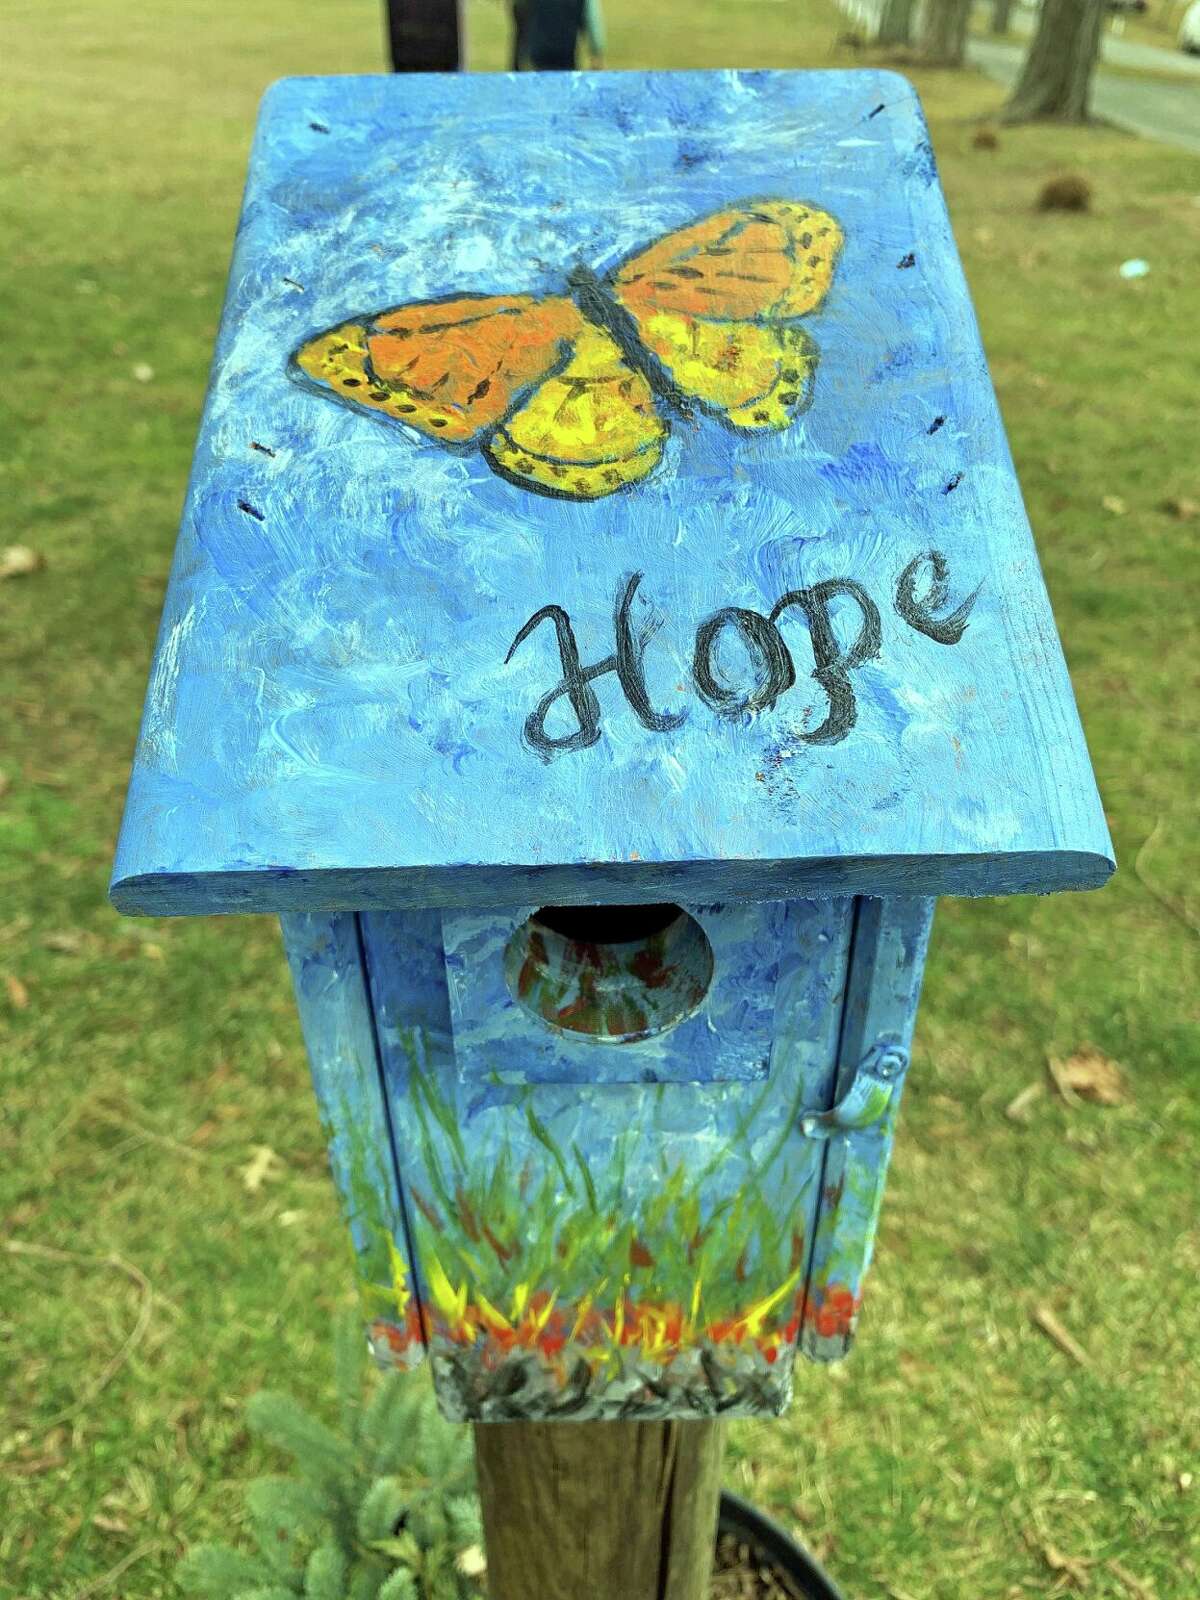 Message of hope on this gaily painted Heart House.